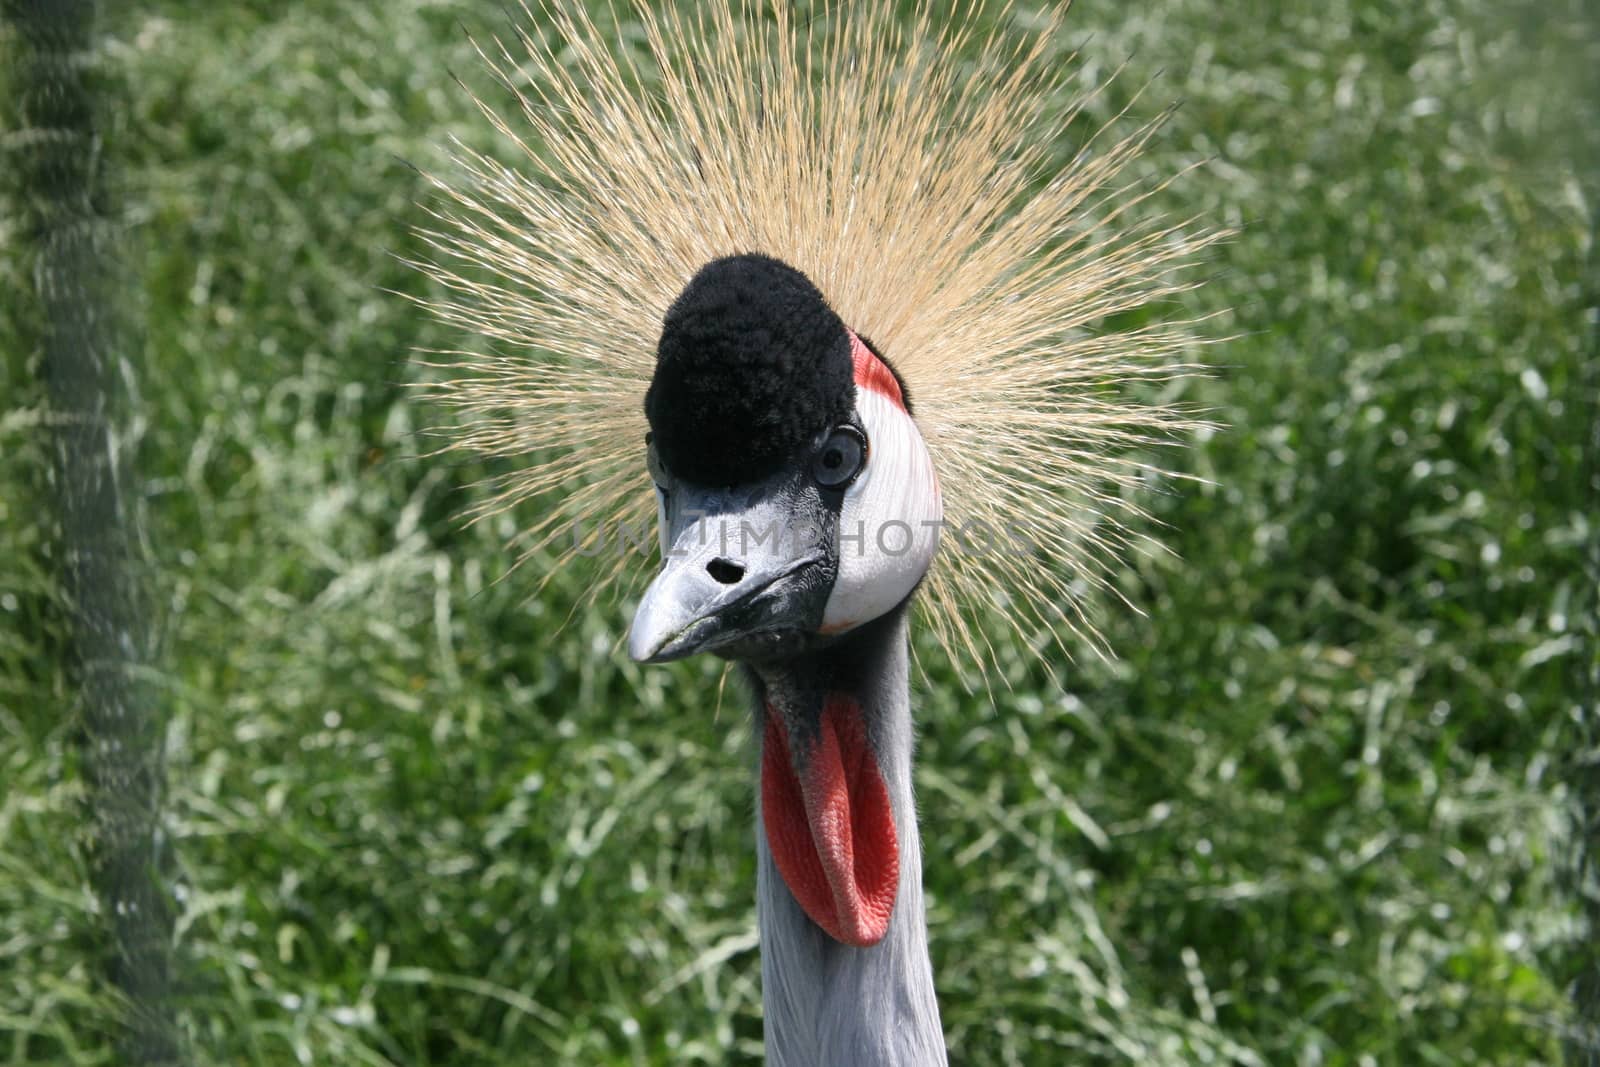 Crowned crane2 by Carratera